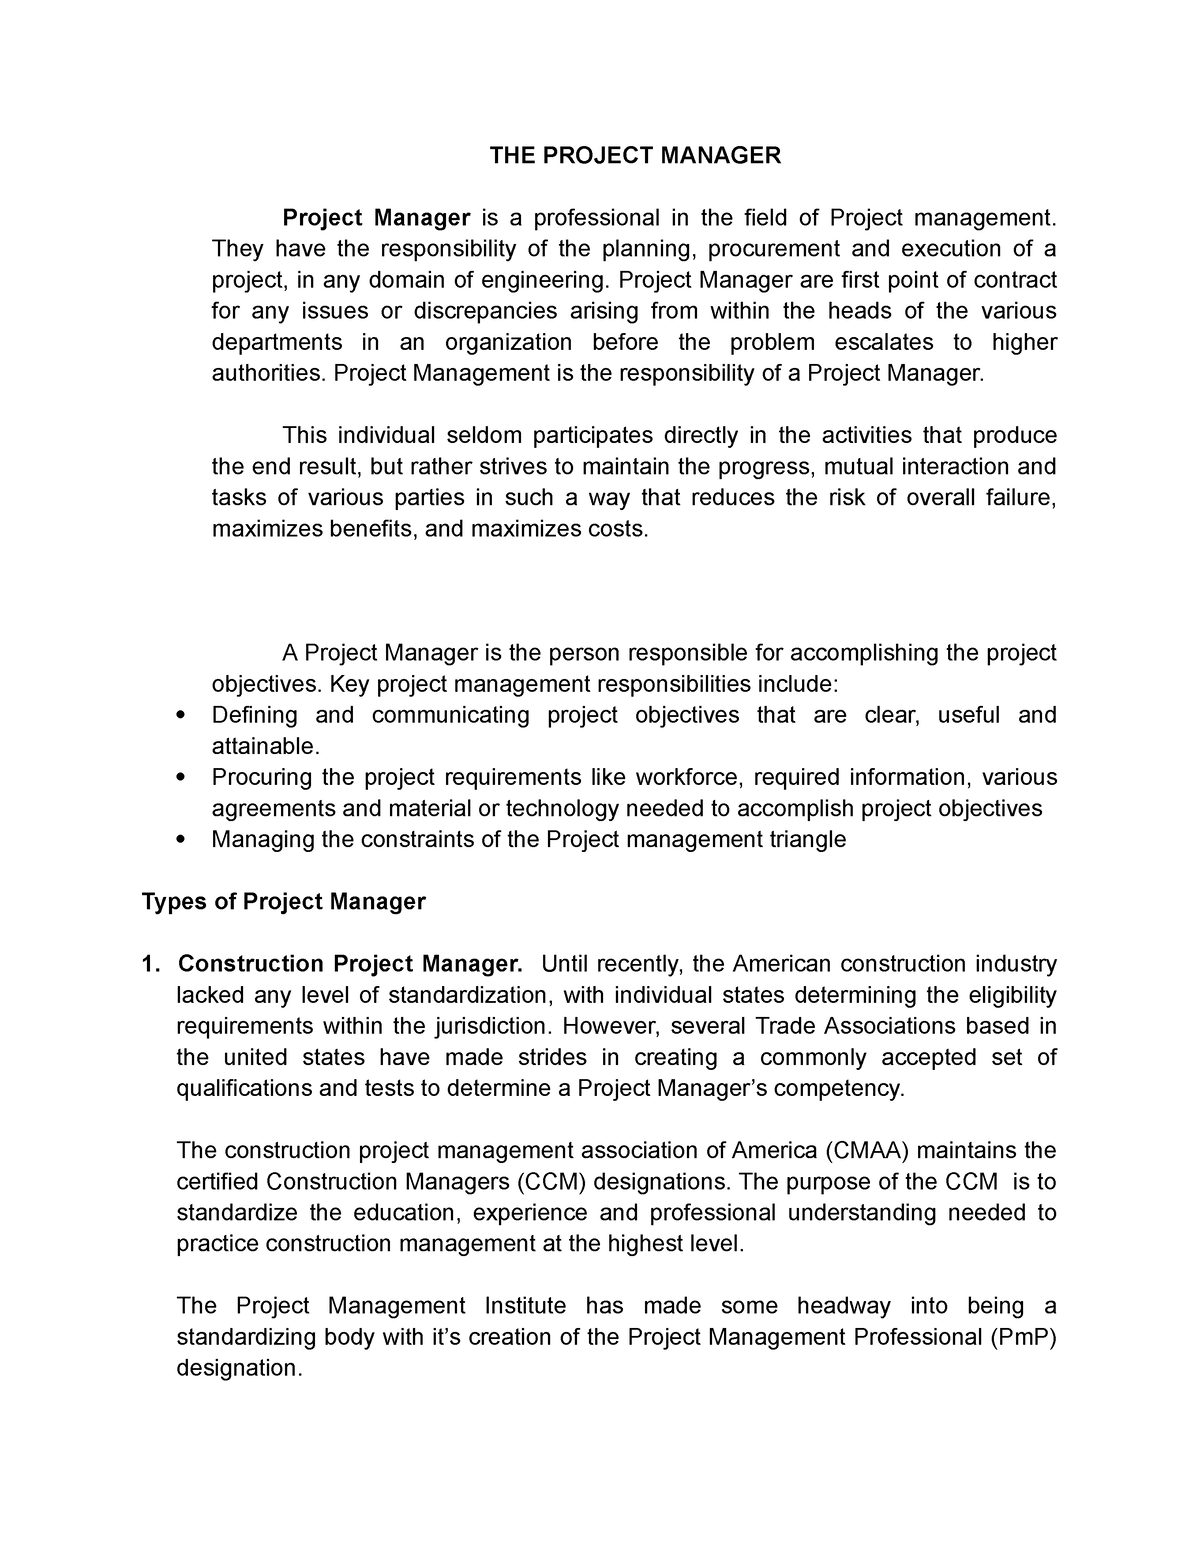 THE Project Manager - THE PROJECT MANAGER Project Manager is a ...